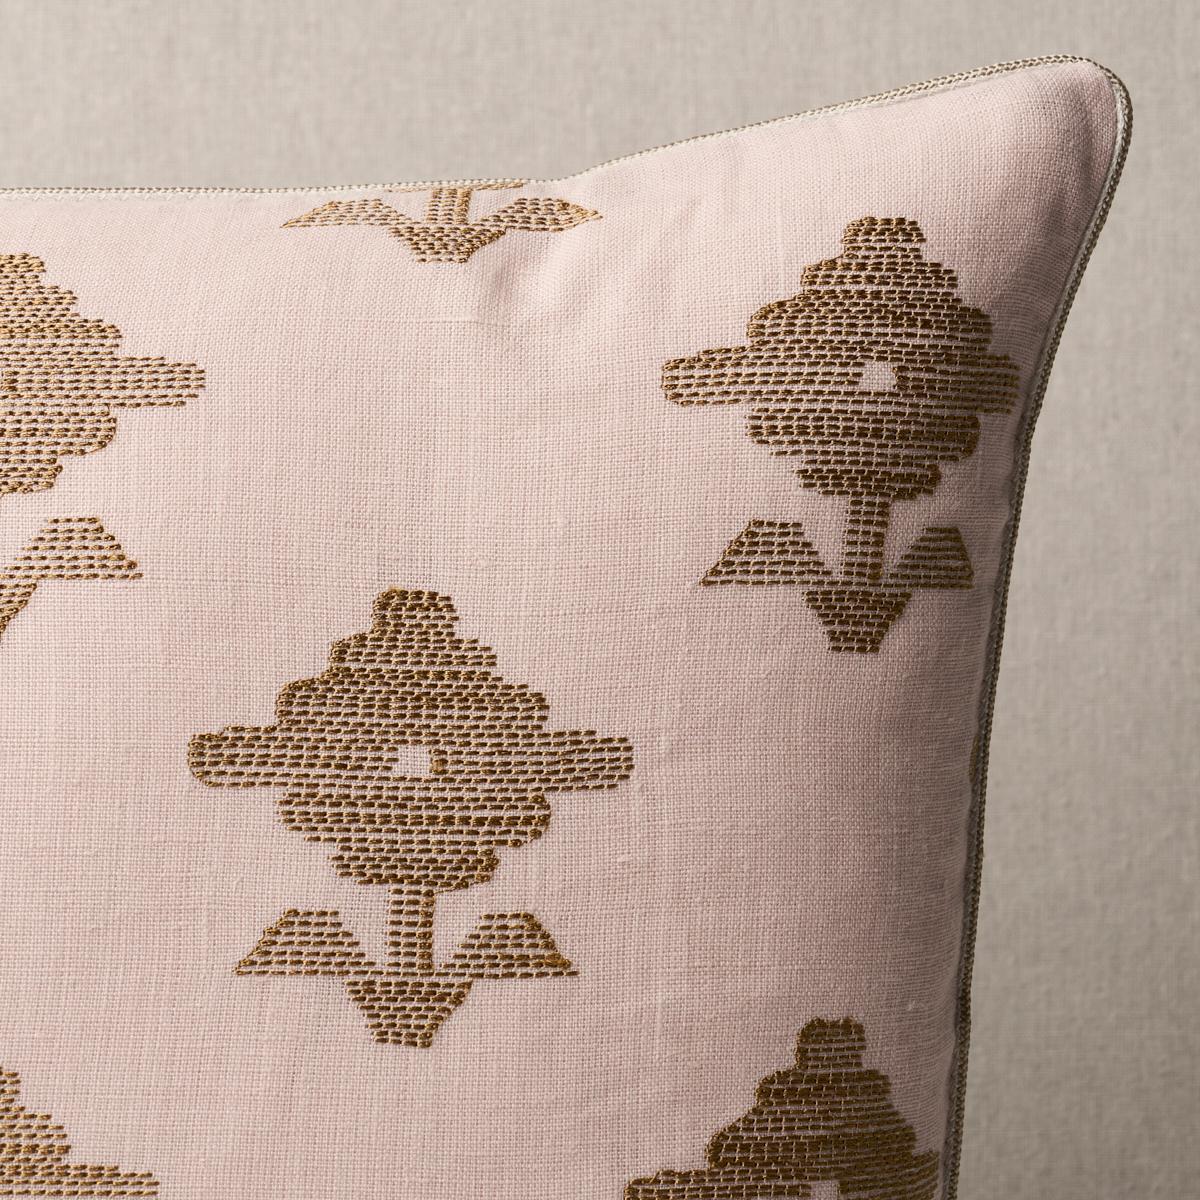 This pillow features Rubia Embroidery. Made on a 100% linen ground, the stylized flowers are rendered in an irregular running stitch with a subtle sheen lending it a gorgeous hand and understated elegance. Pillow is finished with a welt in Gustave